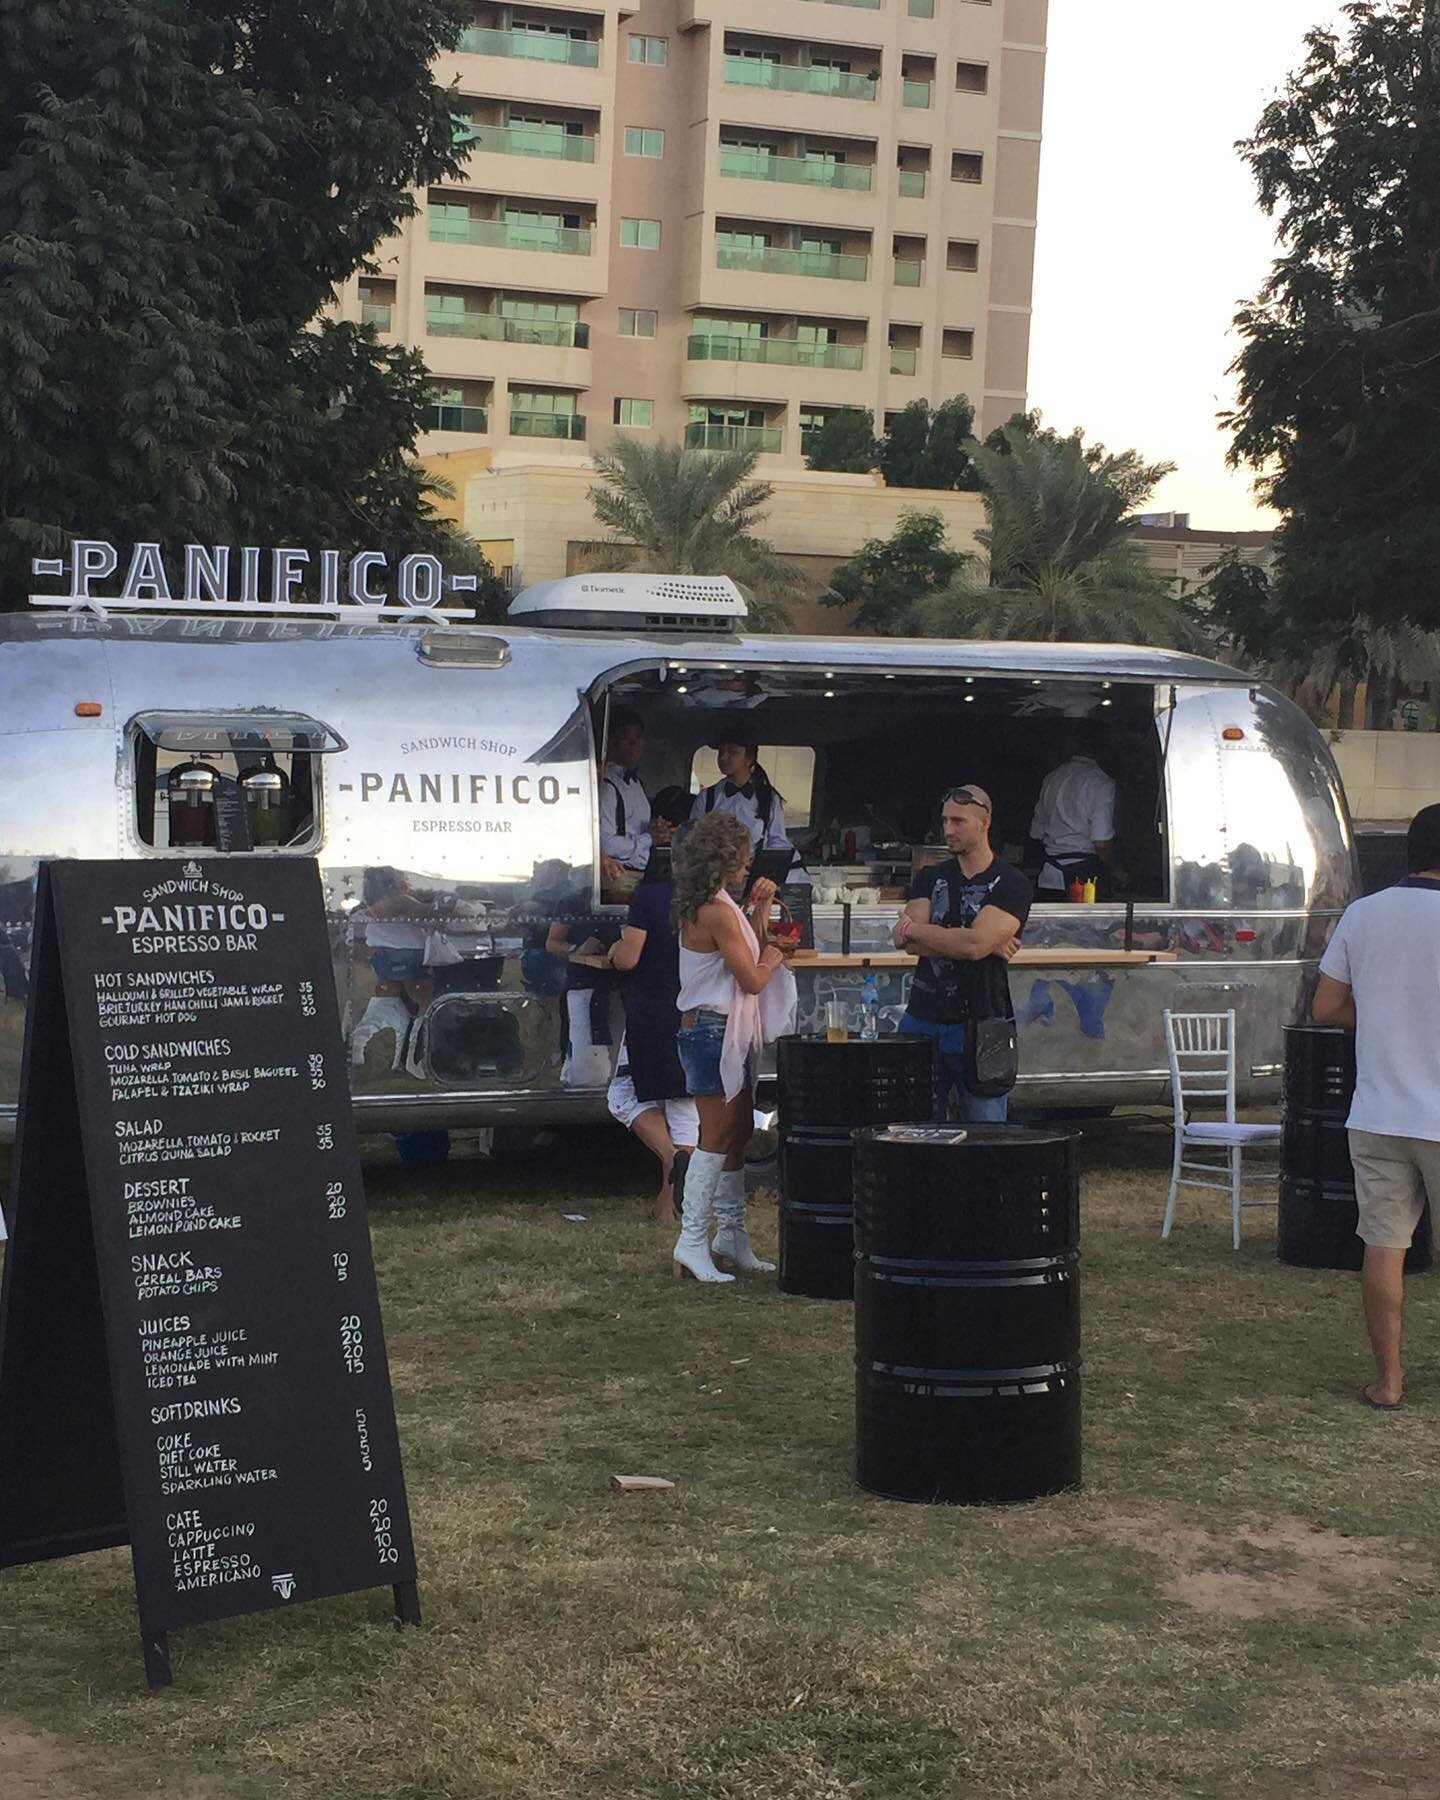 What a journey our DIFC adventure has been!  It started in 2013 with us renting a food truck, then opening a kiosk, then moving to GV11 and from today, we open in Central Park Towers! 

Ok, so we&rsquo;re just open for delivery now, but in a few days